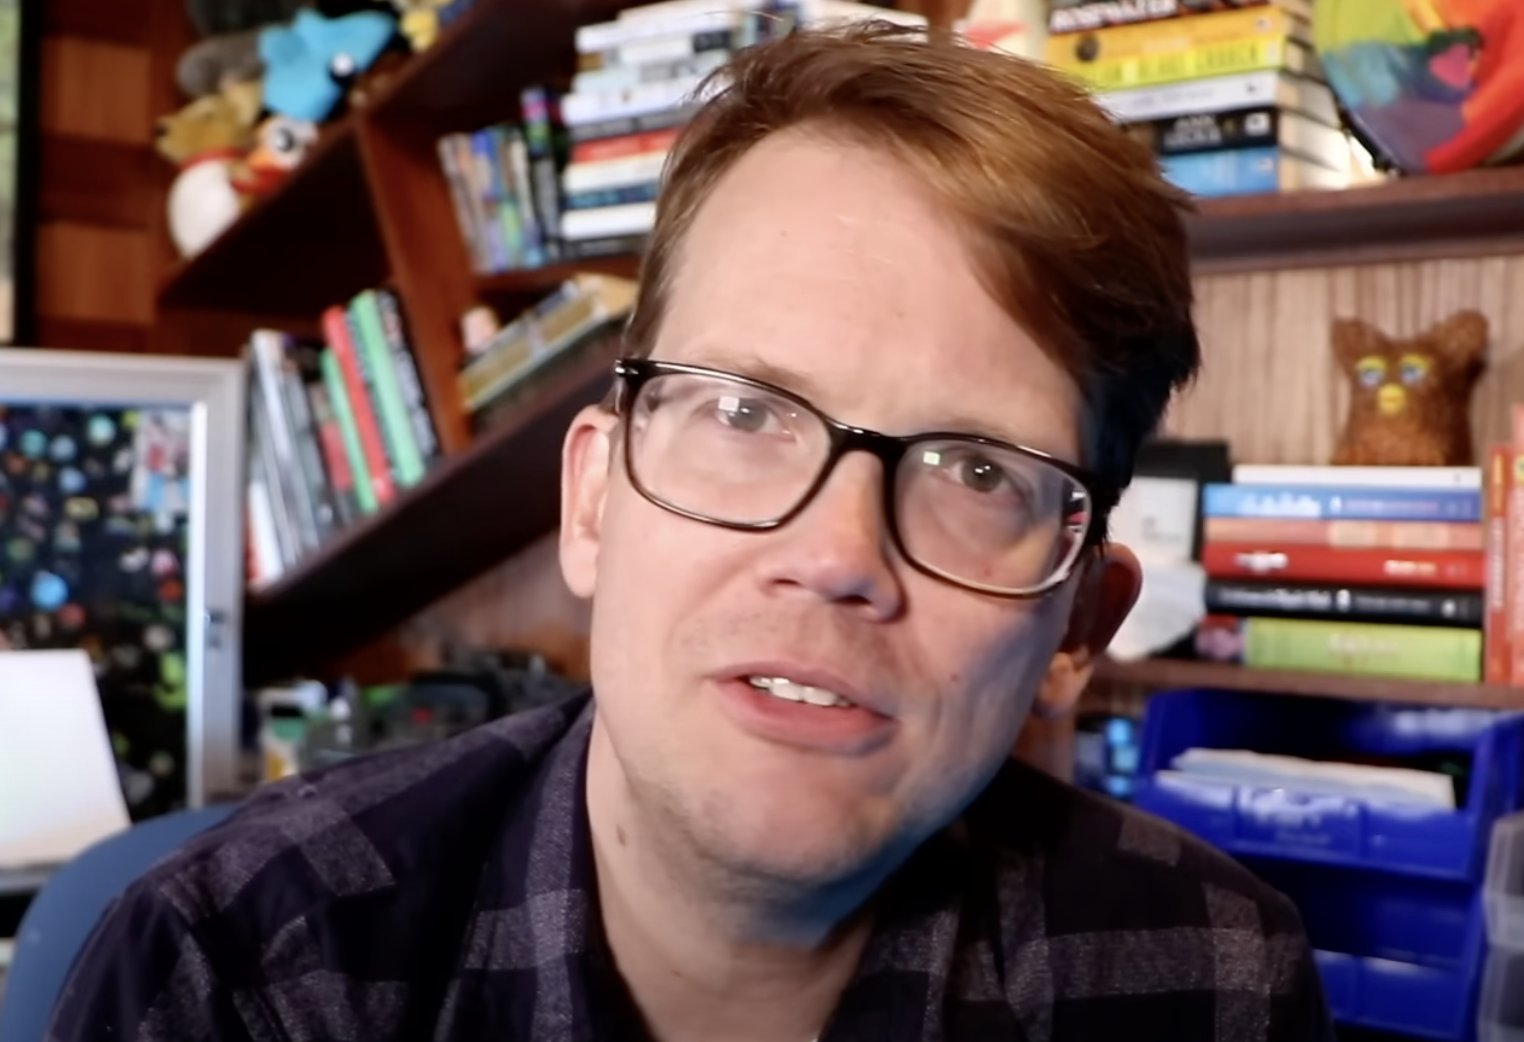 Hank Green, Novelist and YouTube Star Reveals He Has Cancer